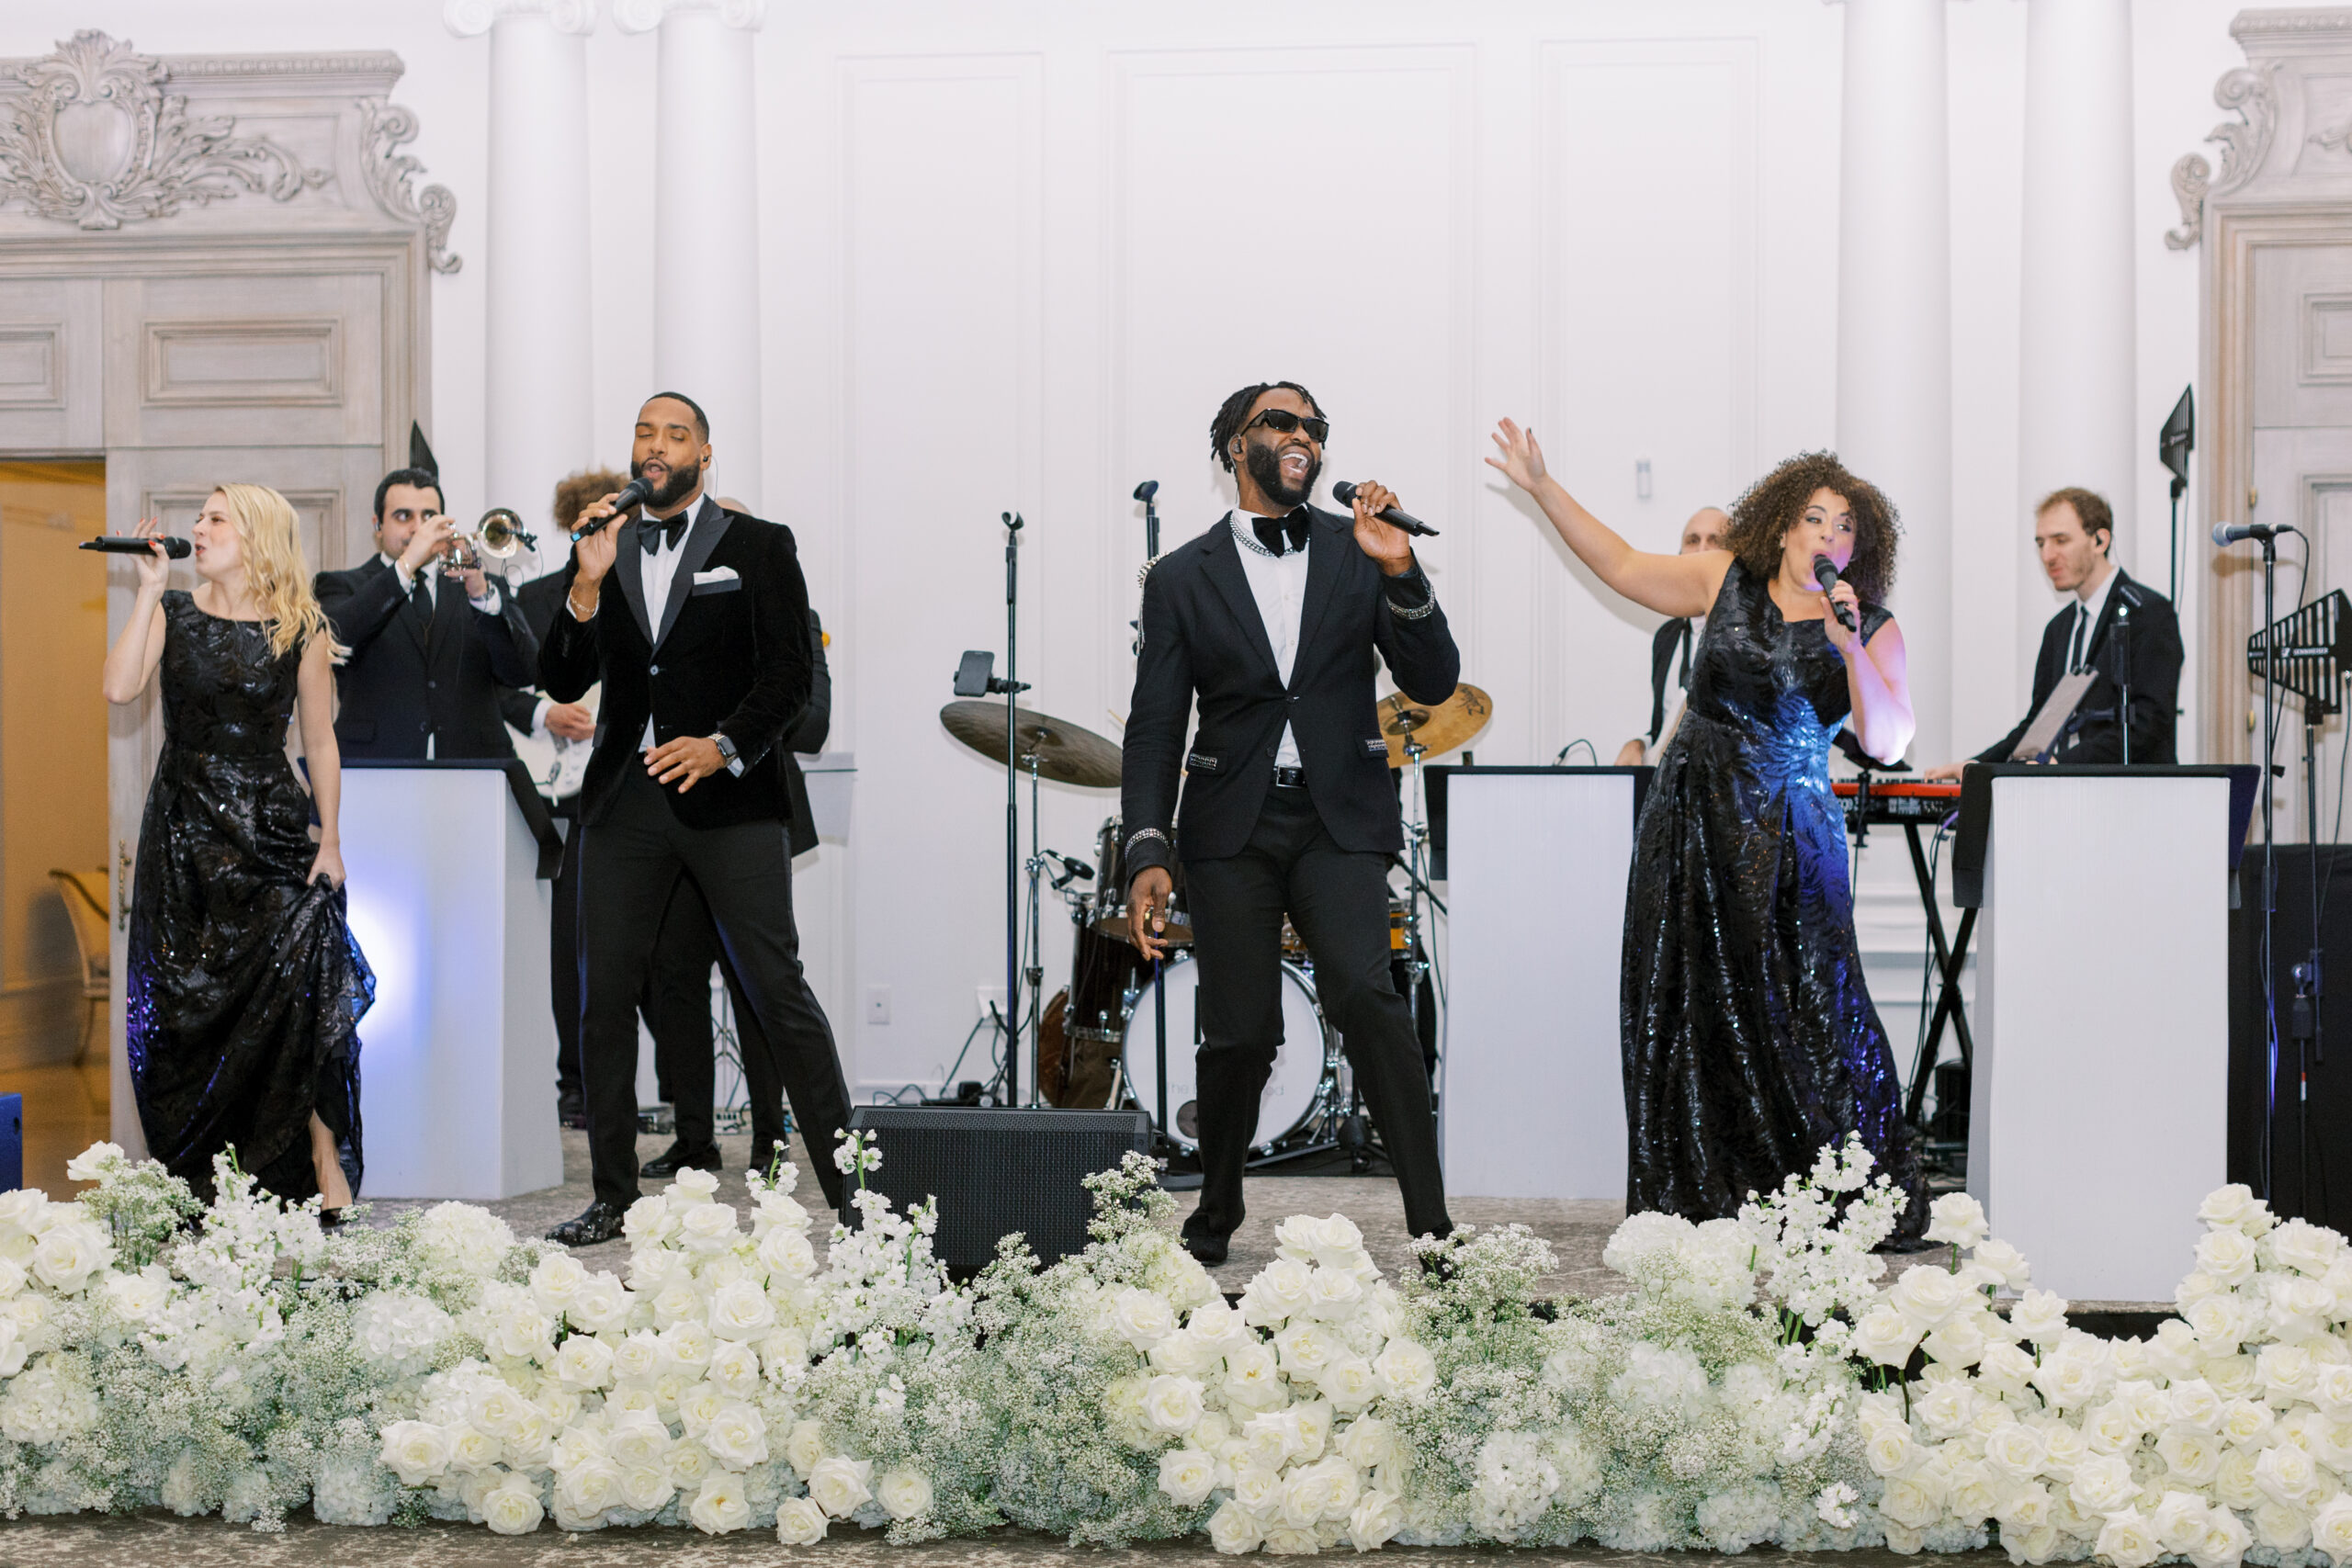 wedding band dressed in black performs energetically in front of flowers